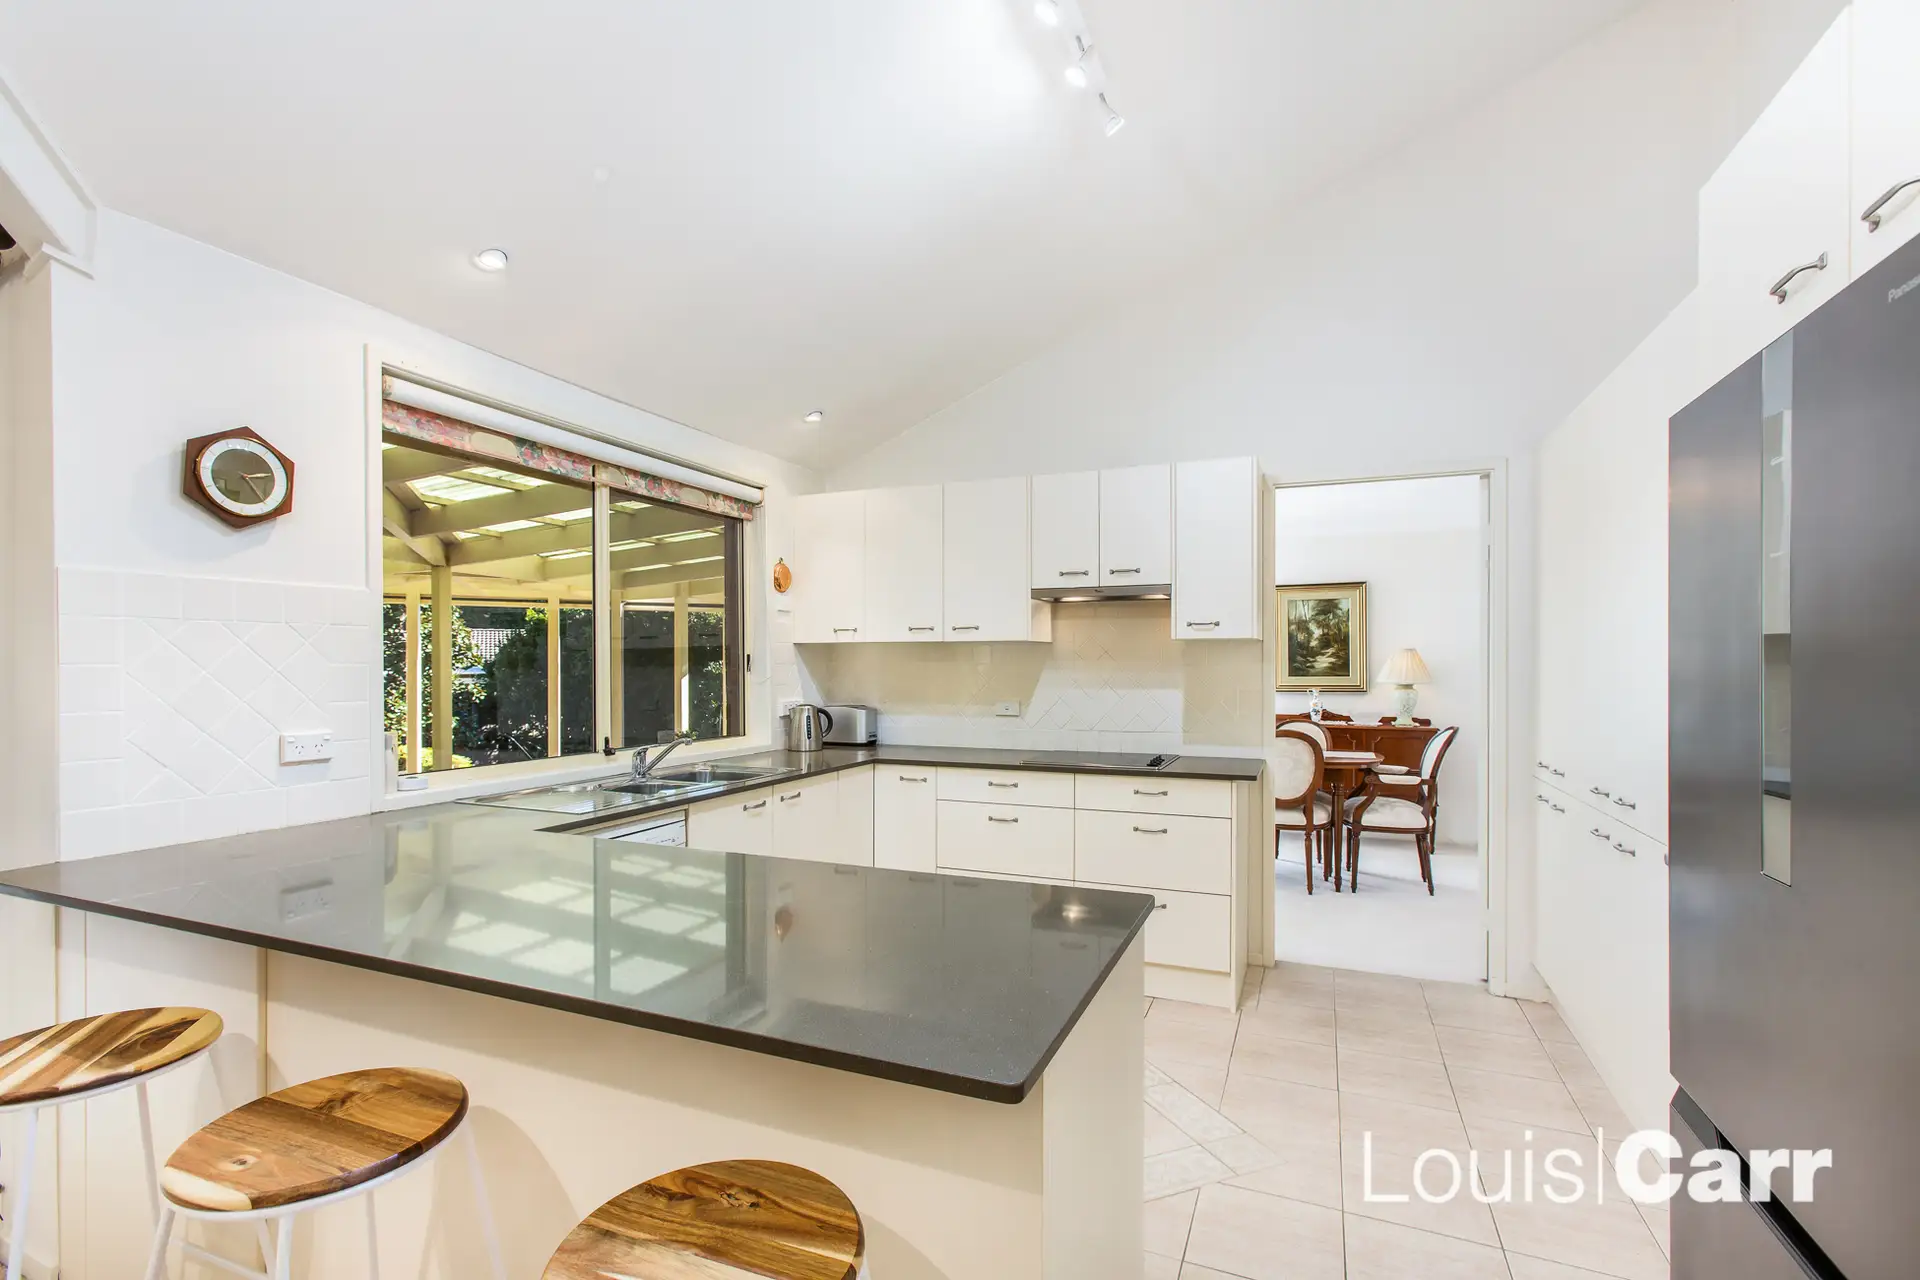 Photo #4: 6 Selina Place, Cherrybrook - Sold by Louis Carr Real Estate